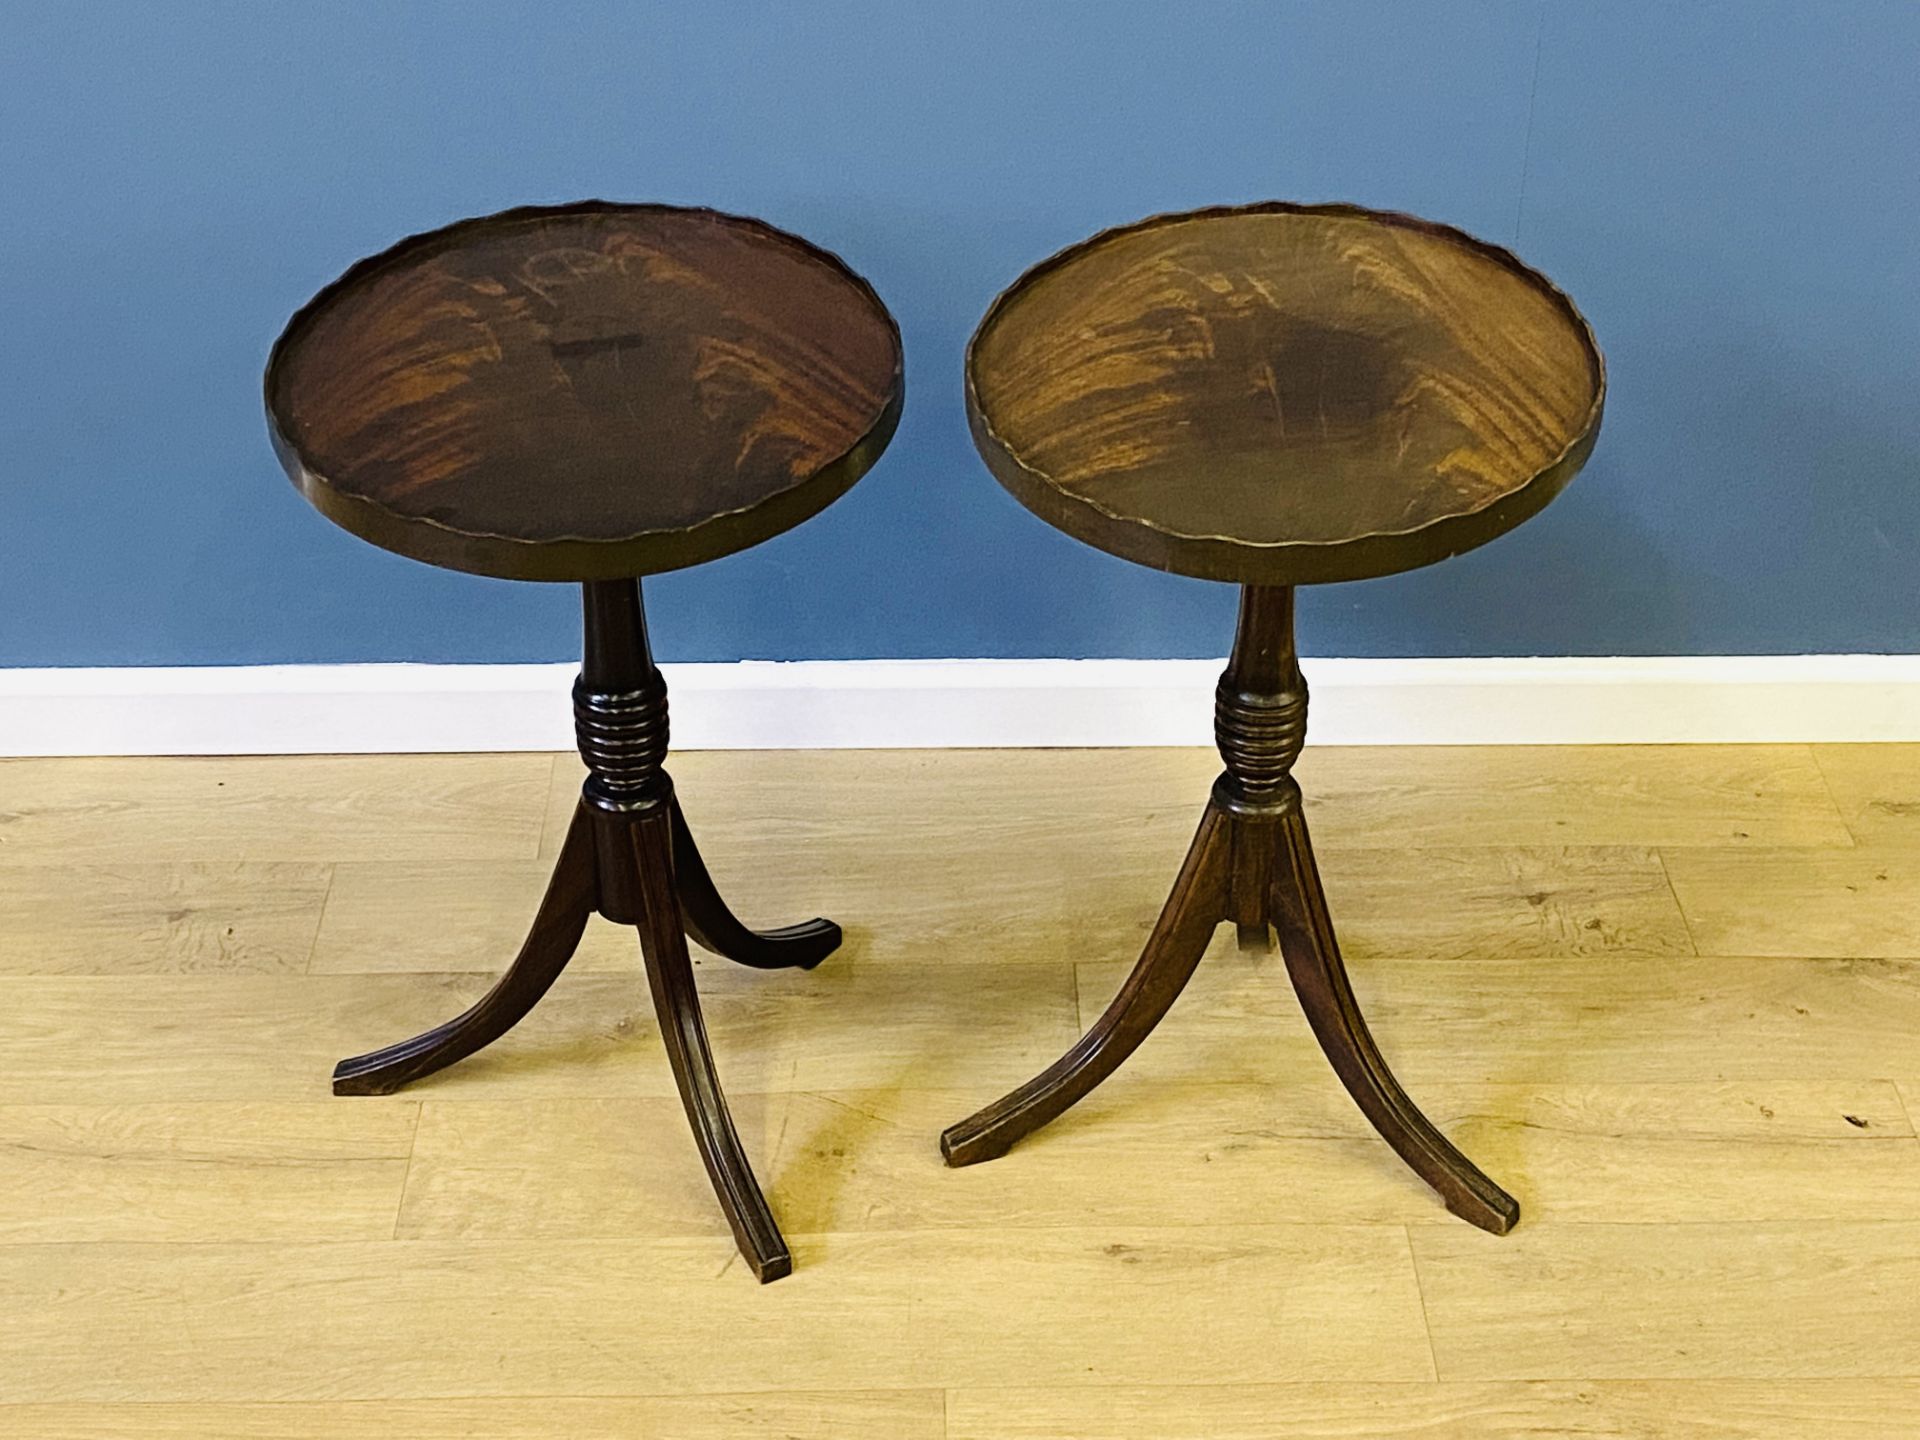 Two mahogany wine tables - Image 2 of 4